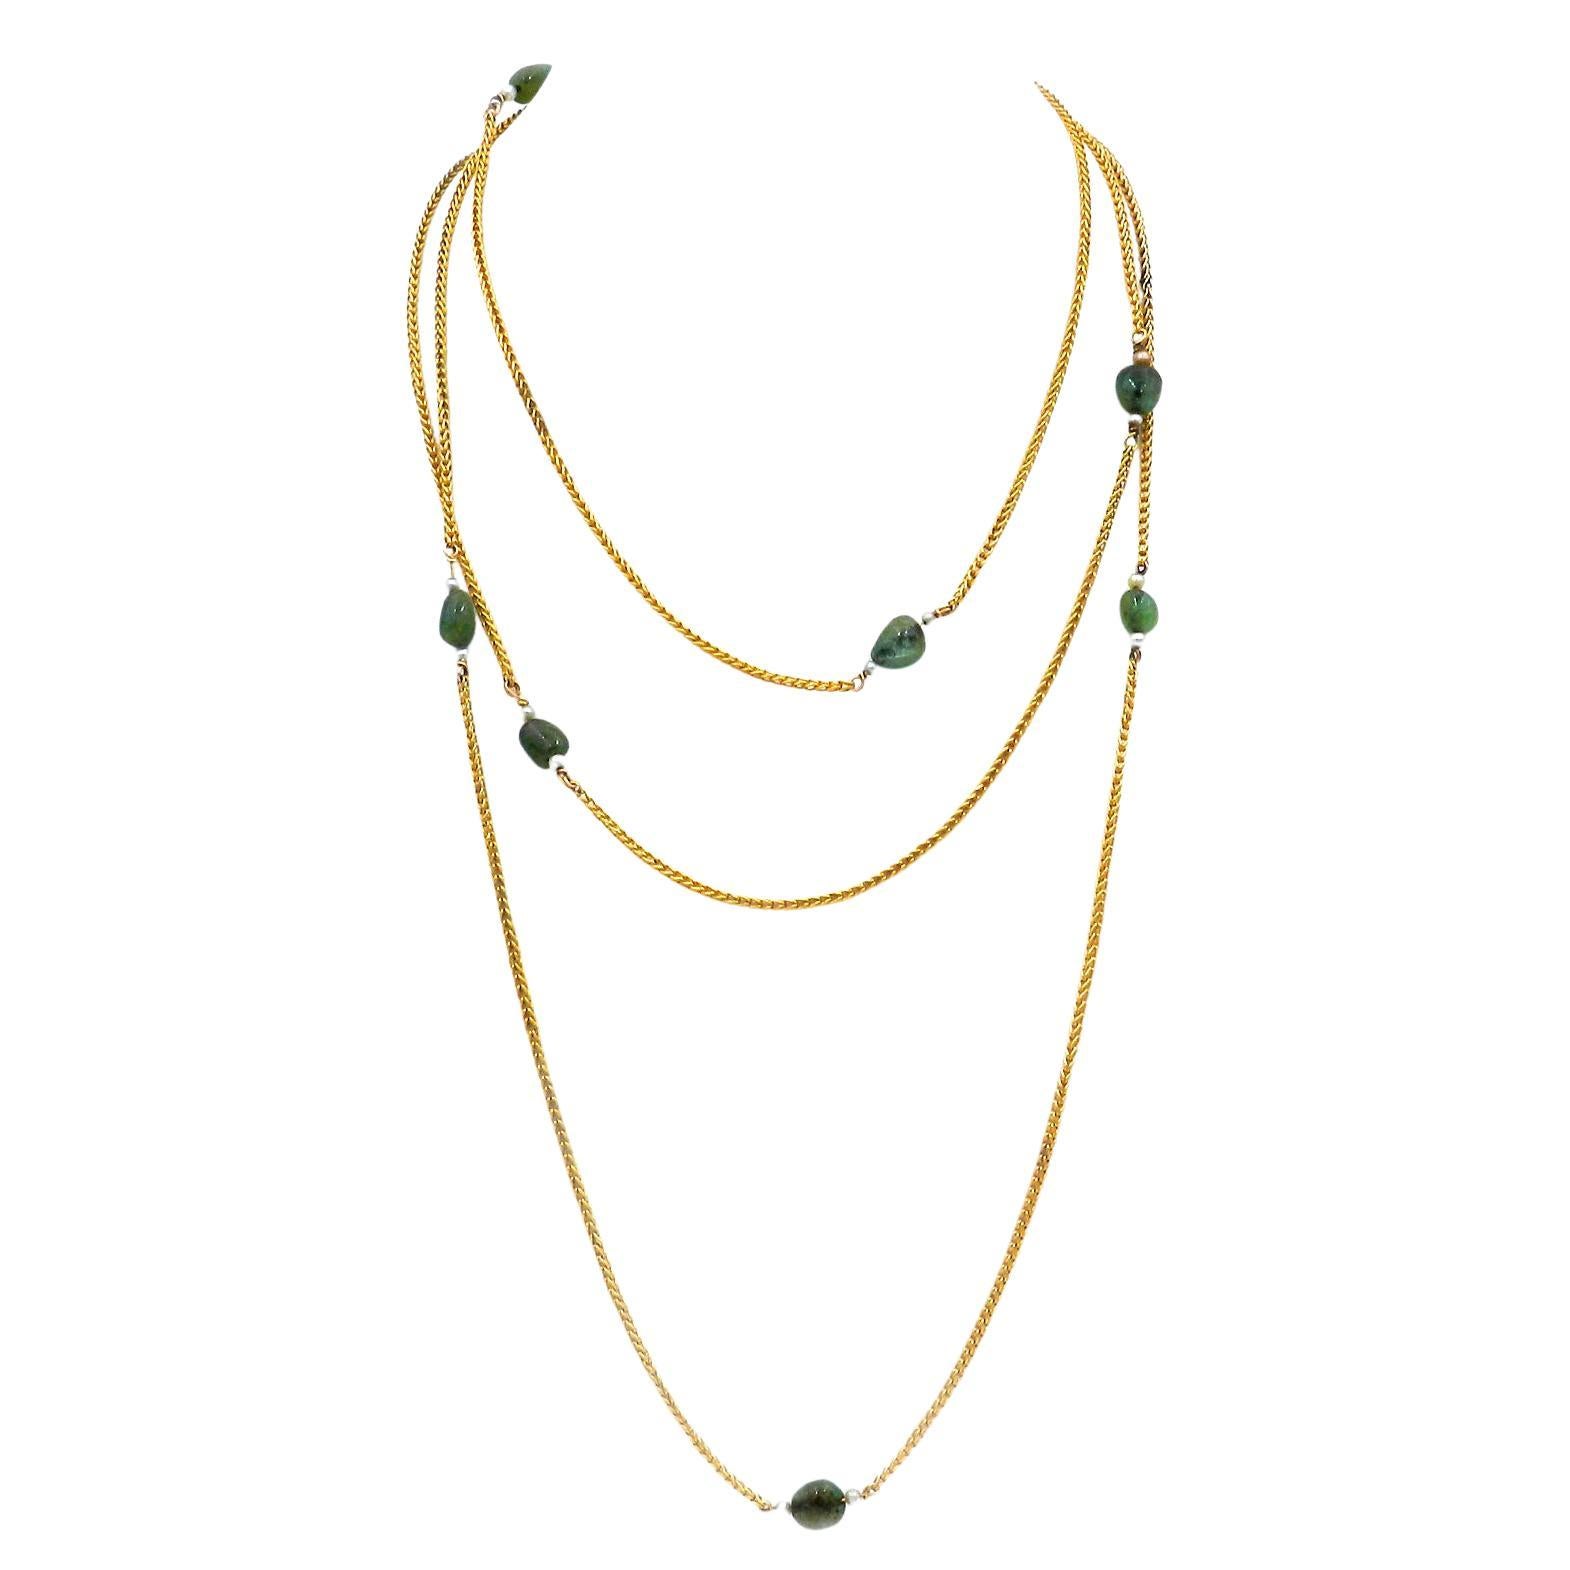 Art Nouveau 18K Gold Emerald and Oriental Pearl Chain Necklace, circa 1910